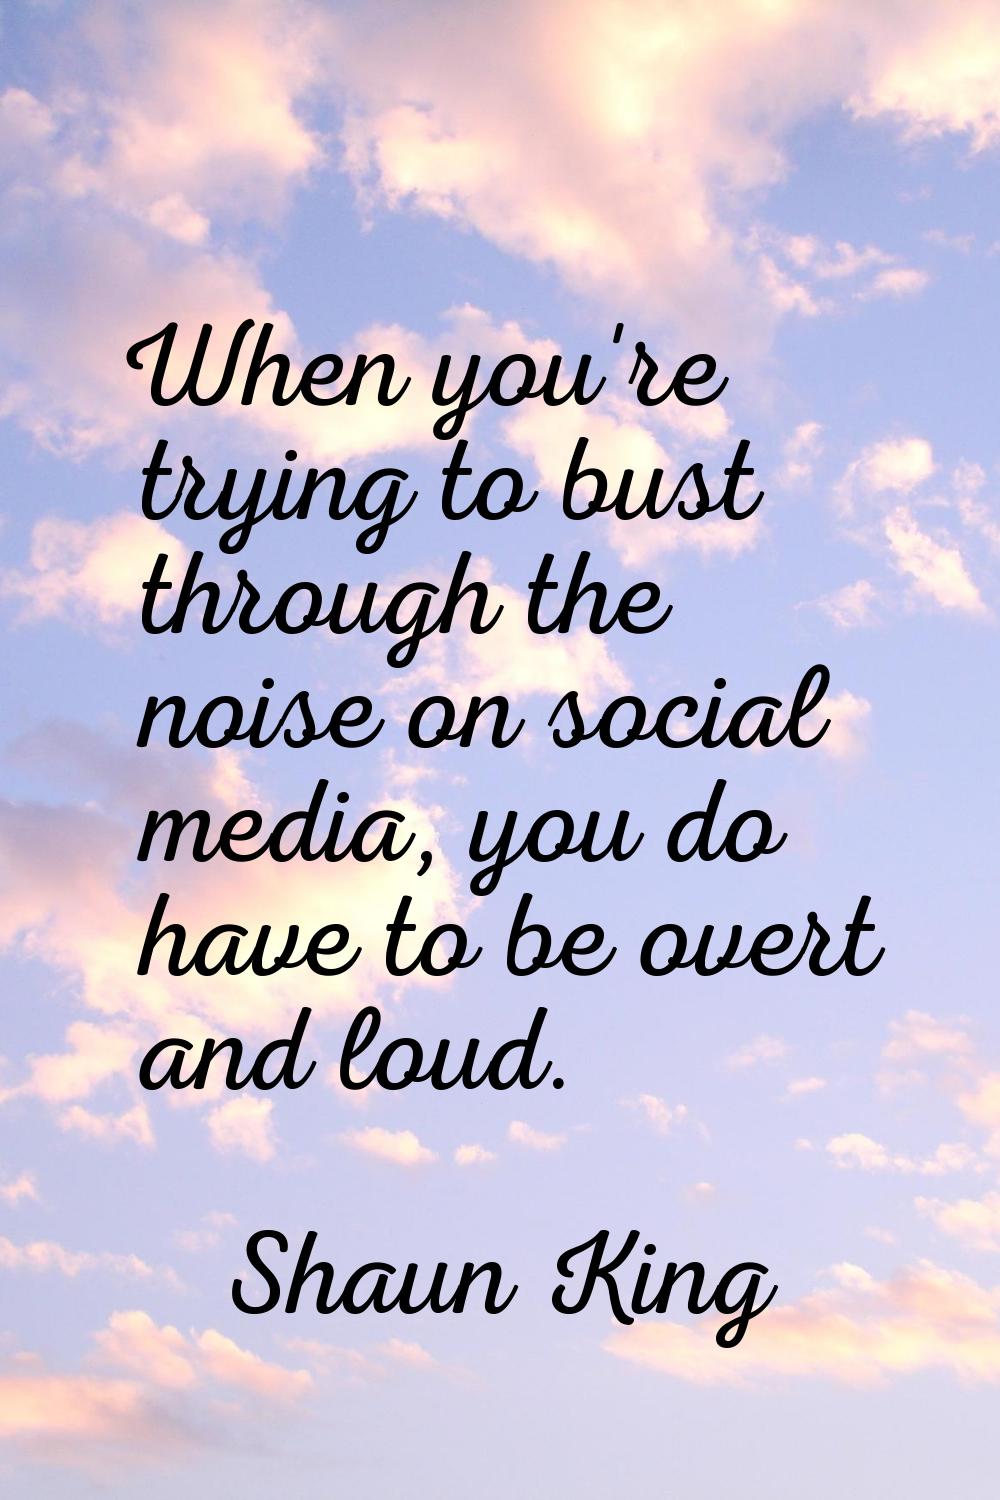 When you're trying to bust through the noise on social media, you do have to be overt and loud.